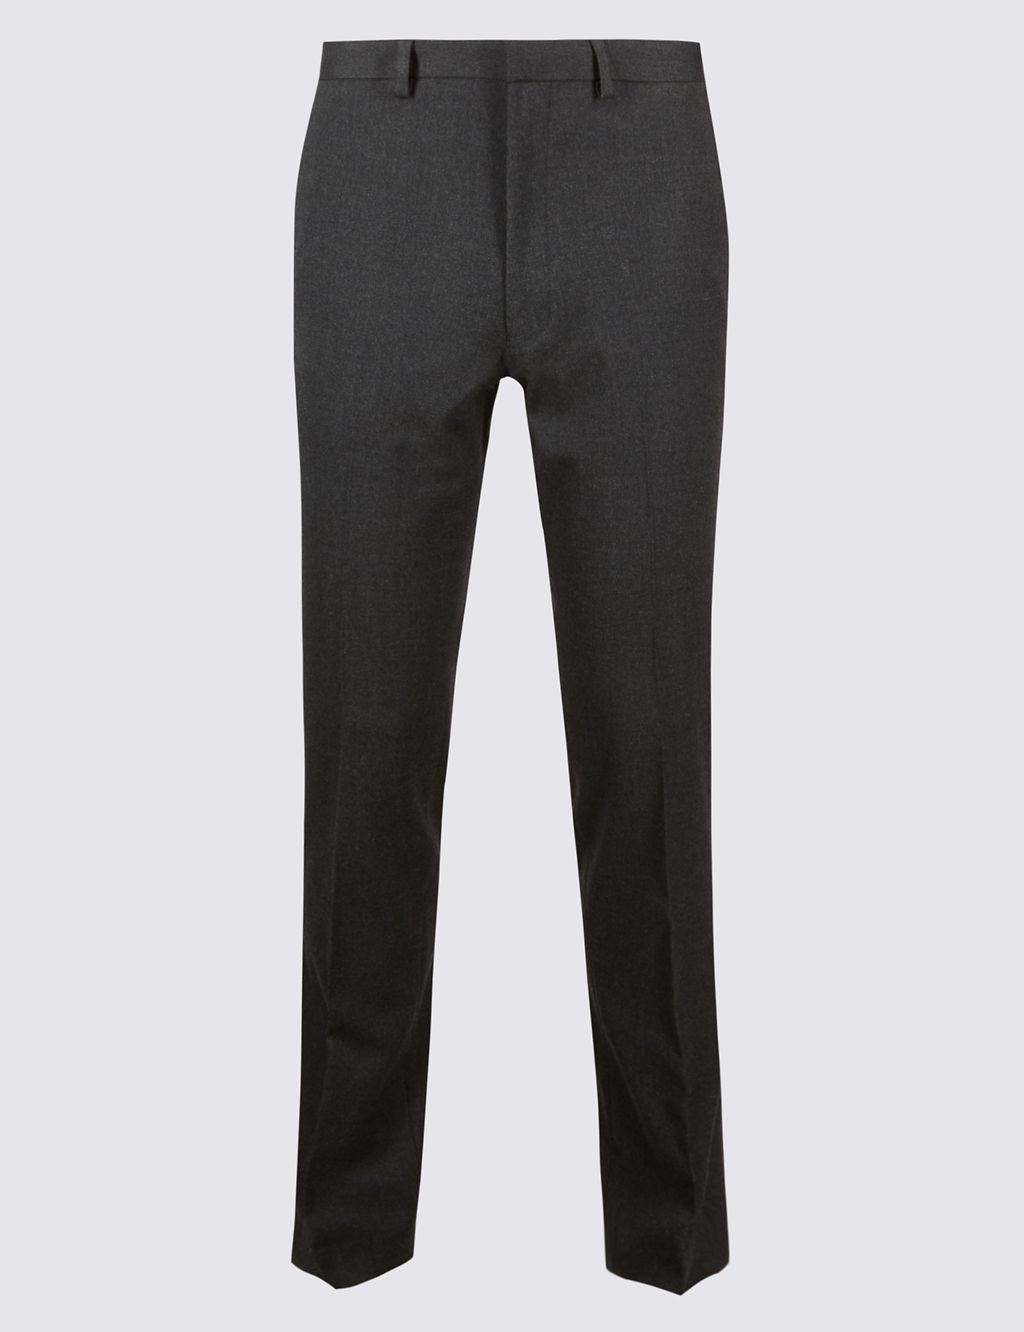 Grey Textured Slim Fit Trousers 1 of 6